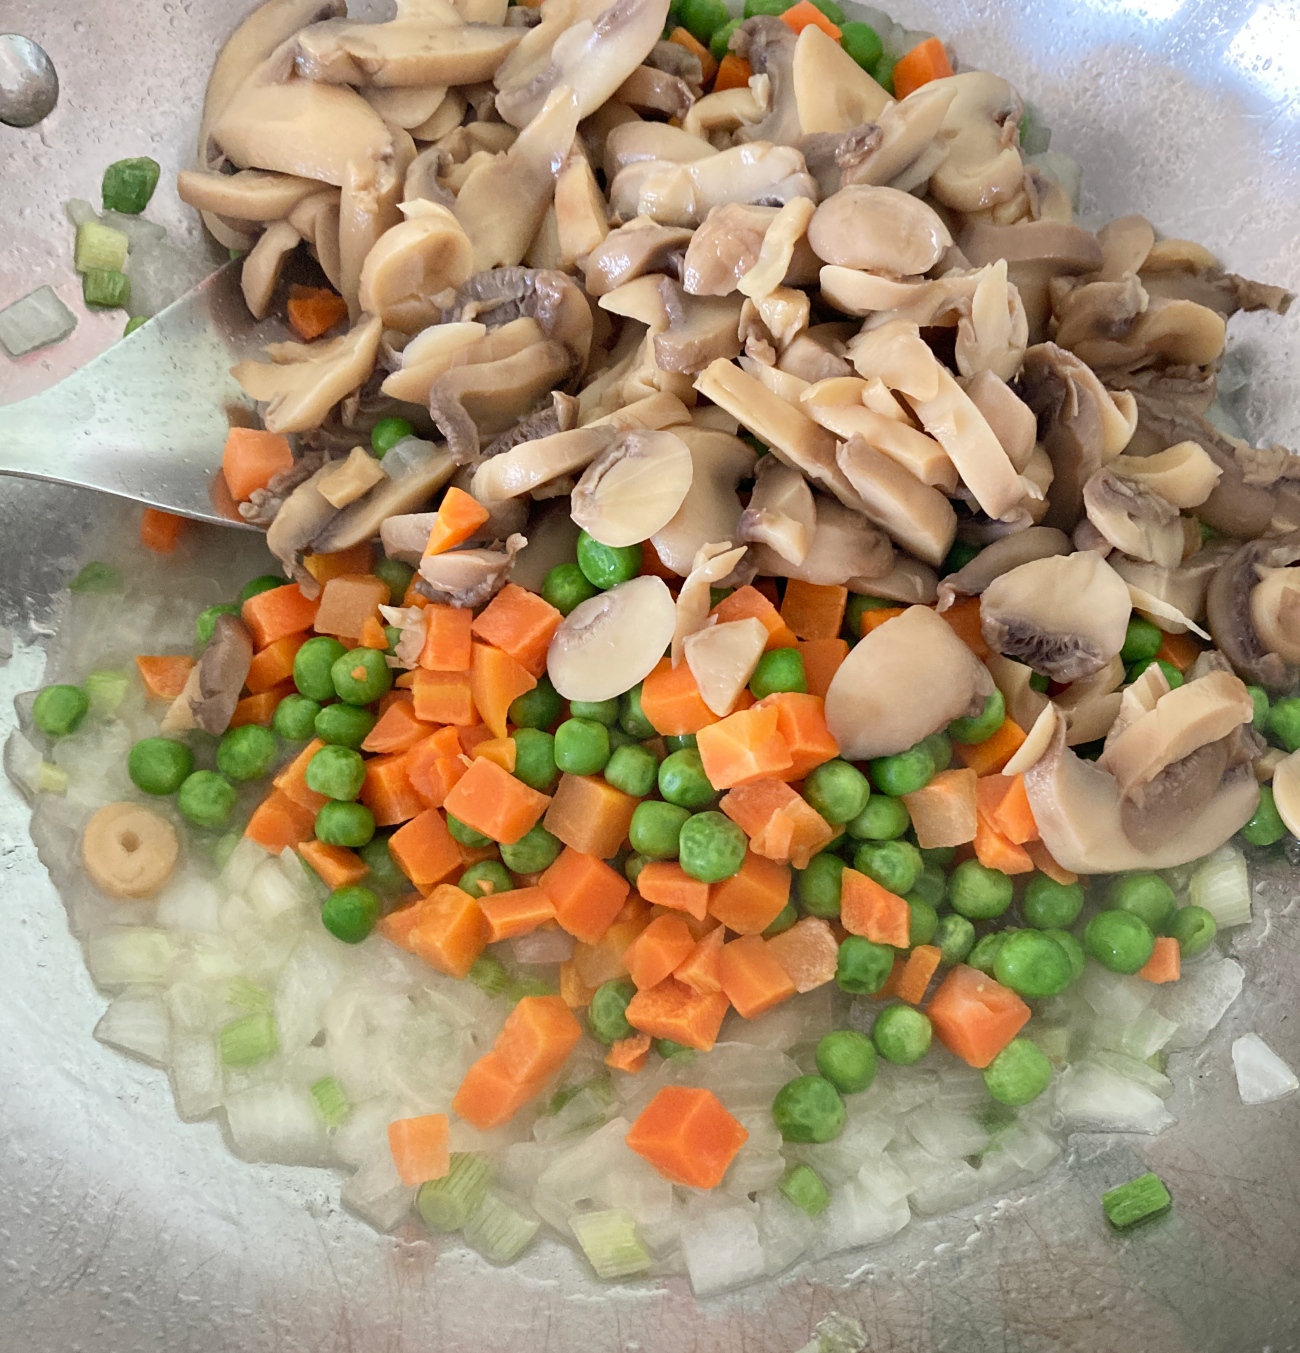 Add 2 tablespoons oil to large skillet or wok. Heat over high and add yellow onion and white parts of green onions. Cook for 2 minutes, then add water. Add peas, carrots, and mushrooms to pan. Cook for 4 minutes, stirring often.